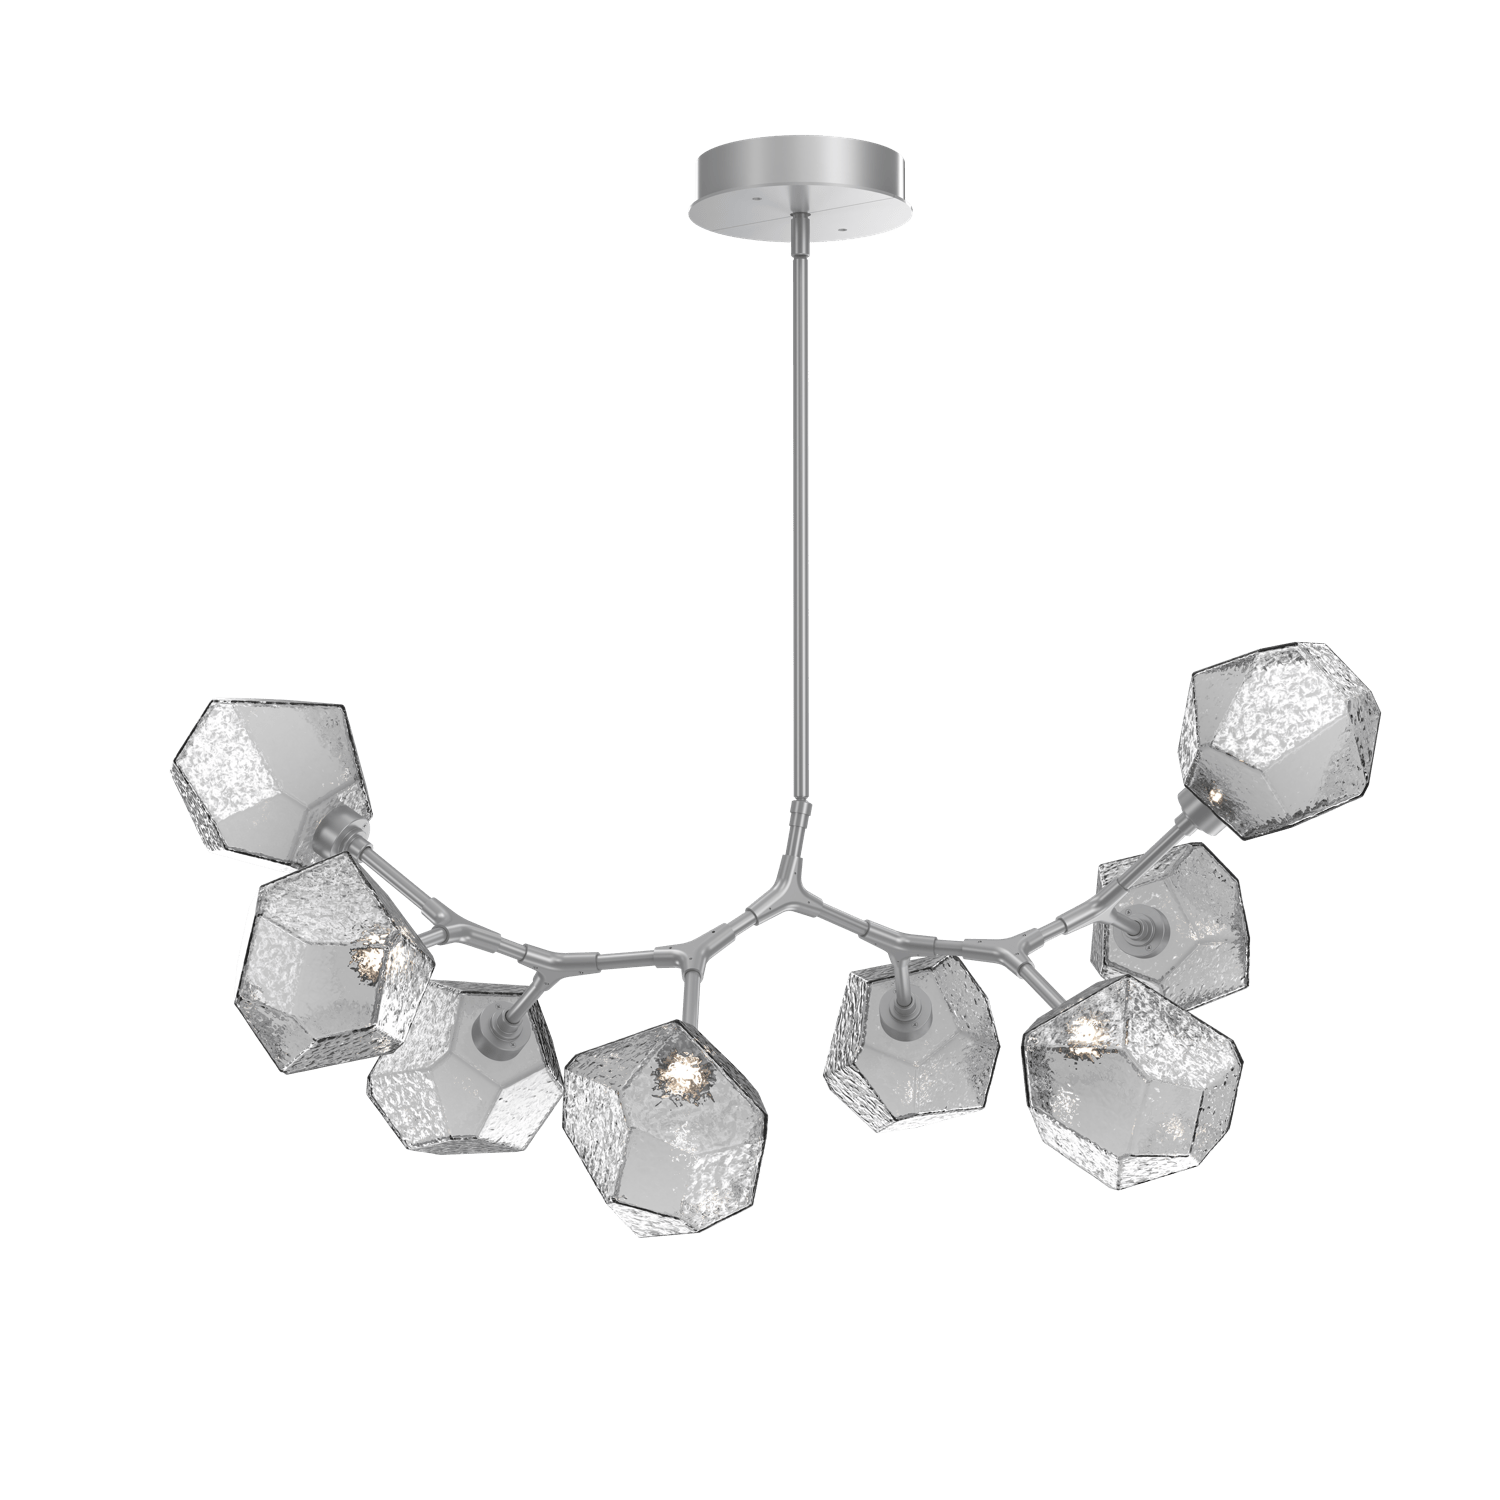 PLB0039-BB-CS-S-Hammerton-Studio-Gem-8-light-modern-branch-chandelier-with-classic-silver-finish-and-smoke-blown-glass-shades-and-LED-lamping